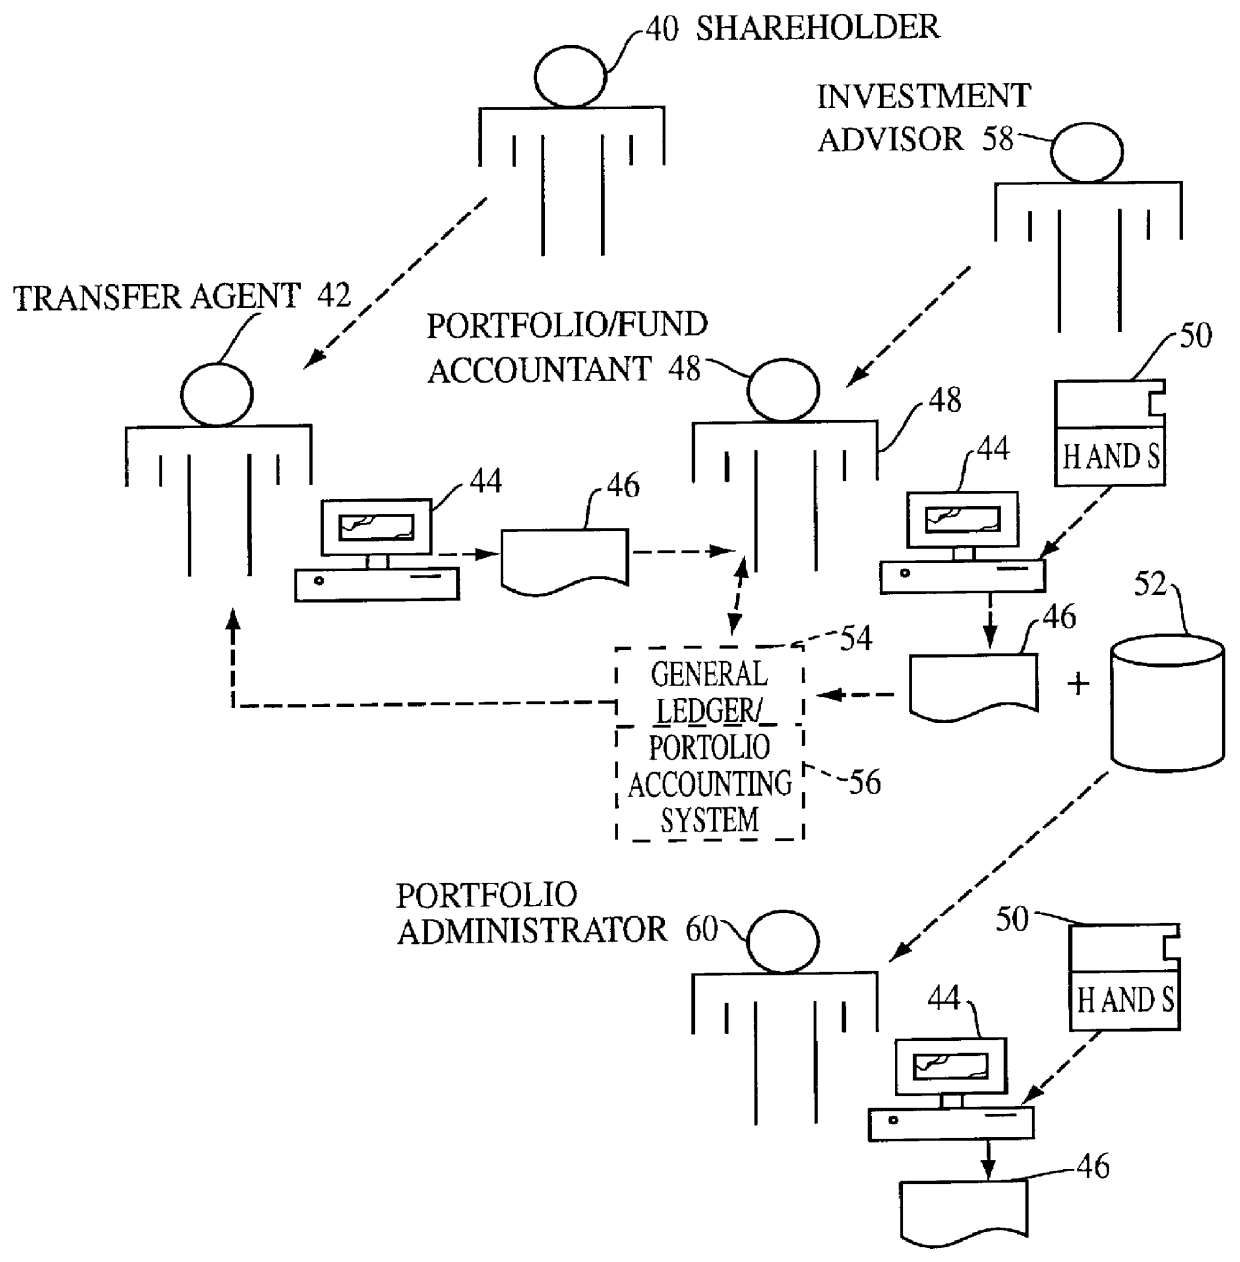 Computer assisted and/or implemented process and architecture for simulating, determining and/or ranking and/or indexing effective corporate governance using complexity theory and agency-based modeling